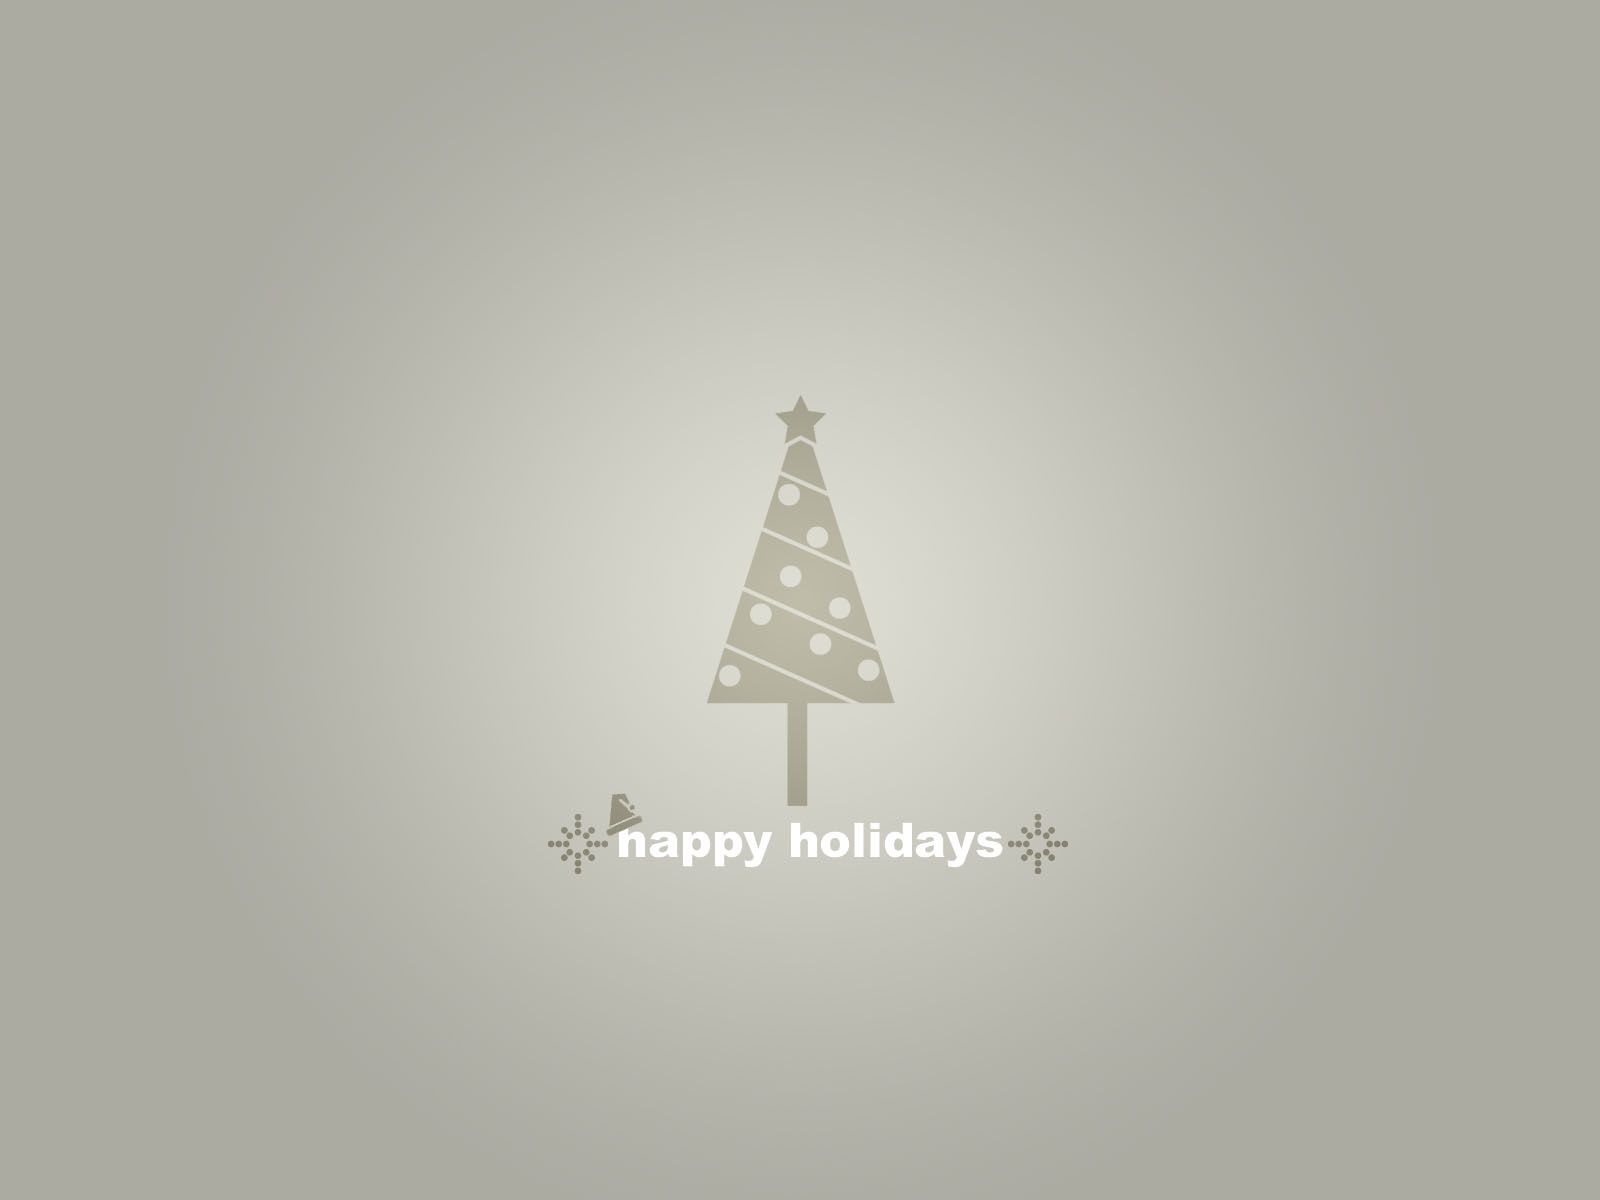 A simple Christmas tree with a star on top and the words 